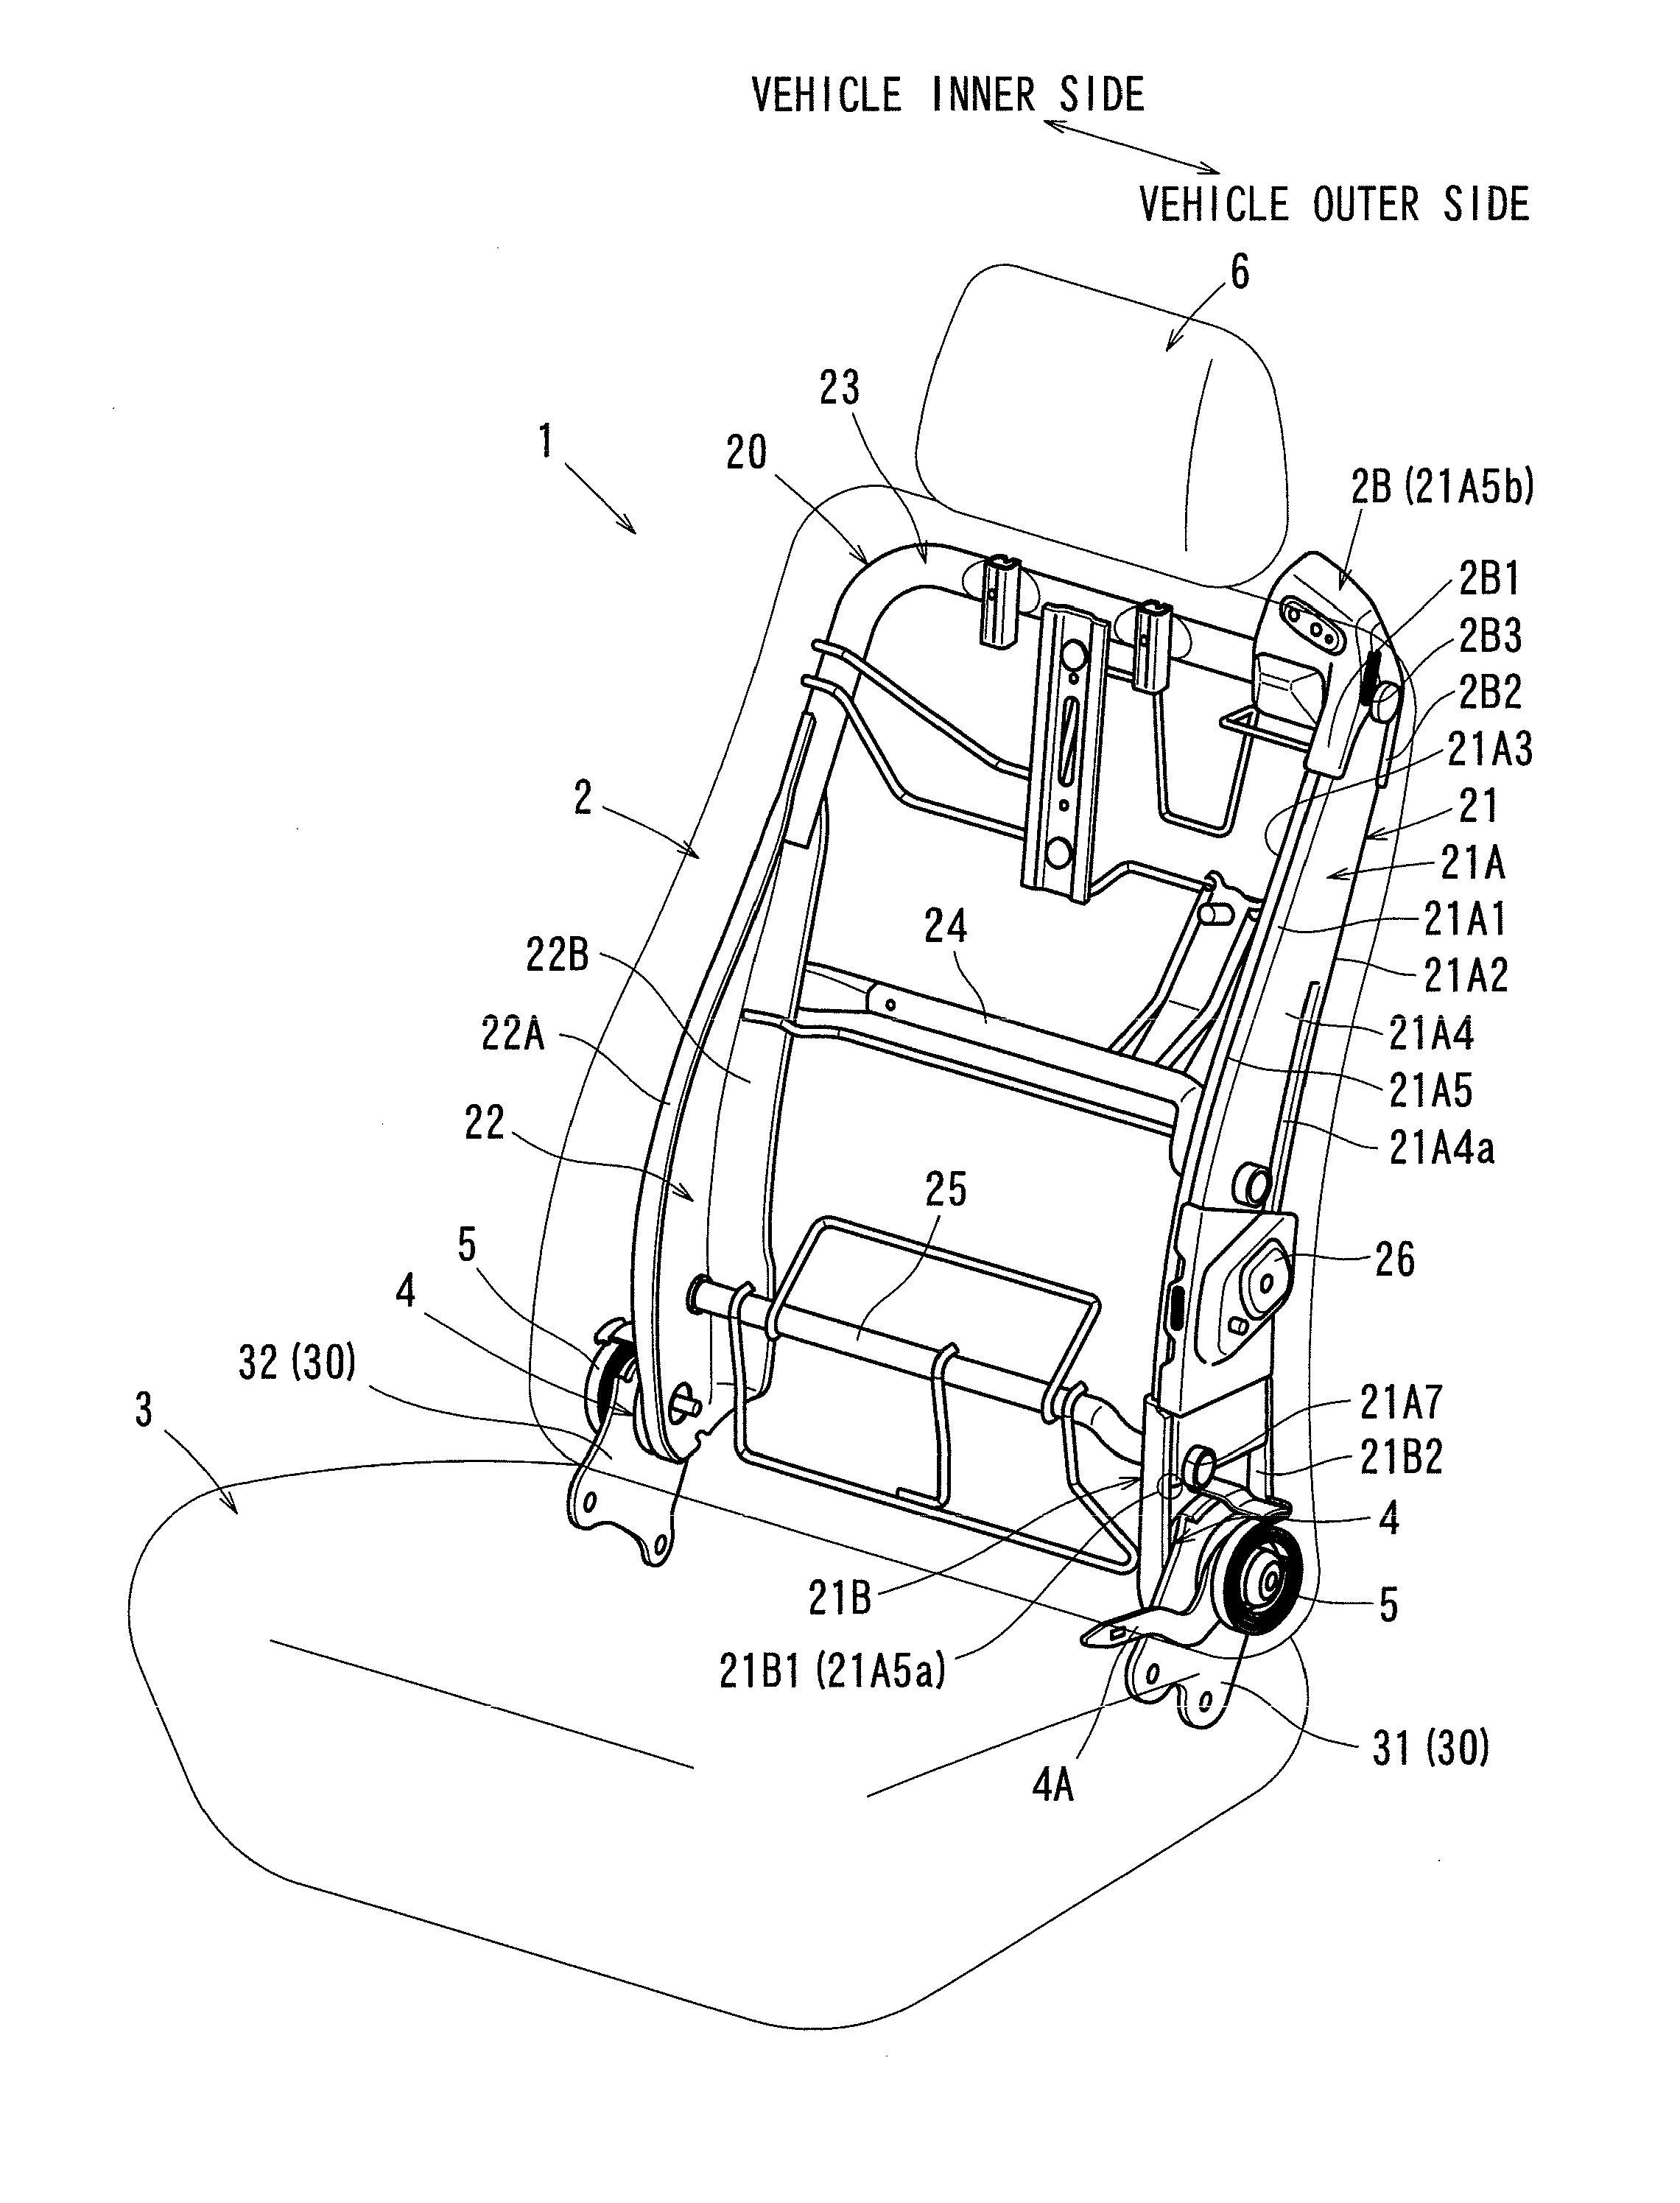 Frame structures for vehicle seats